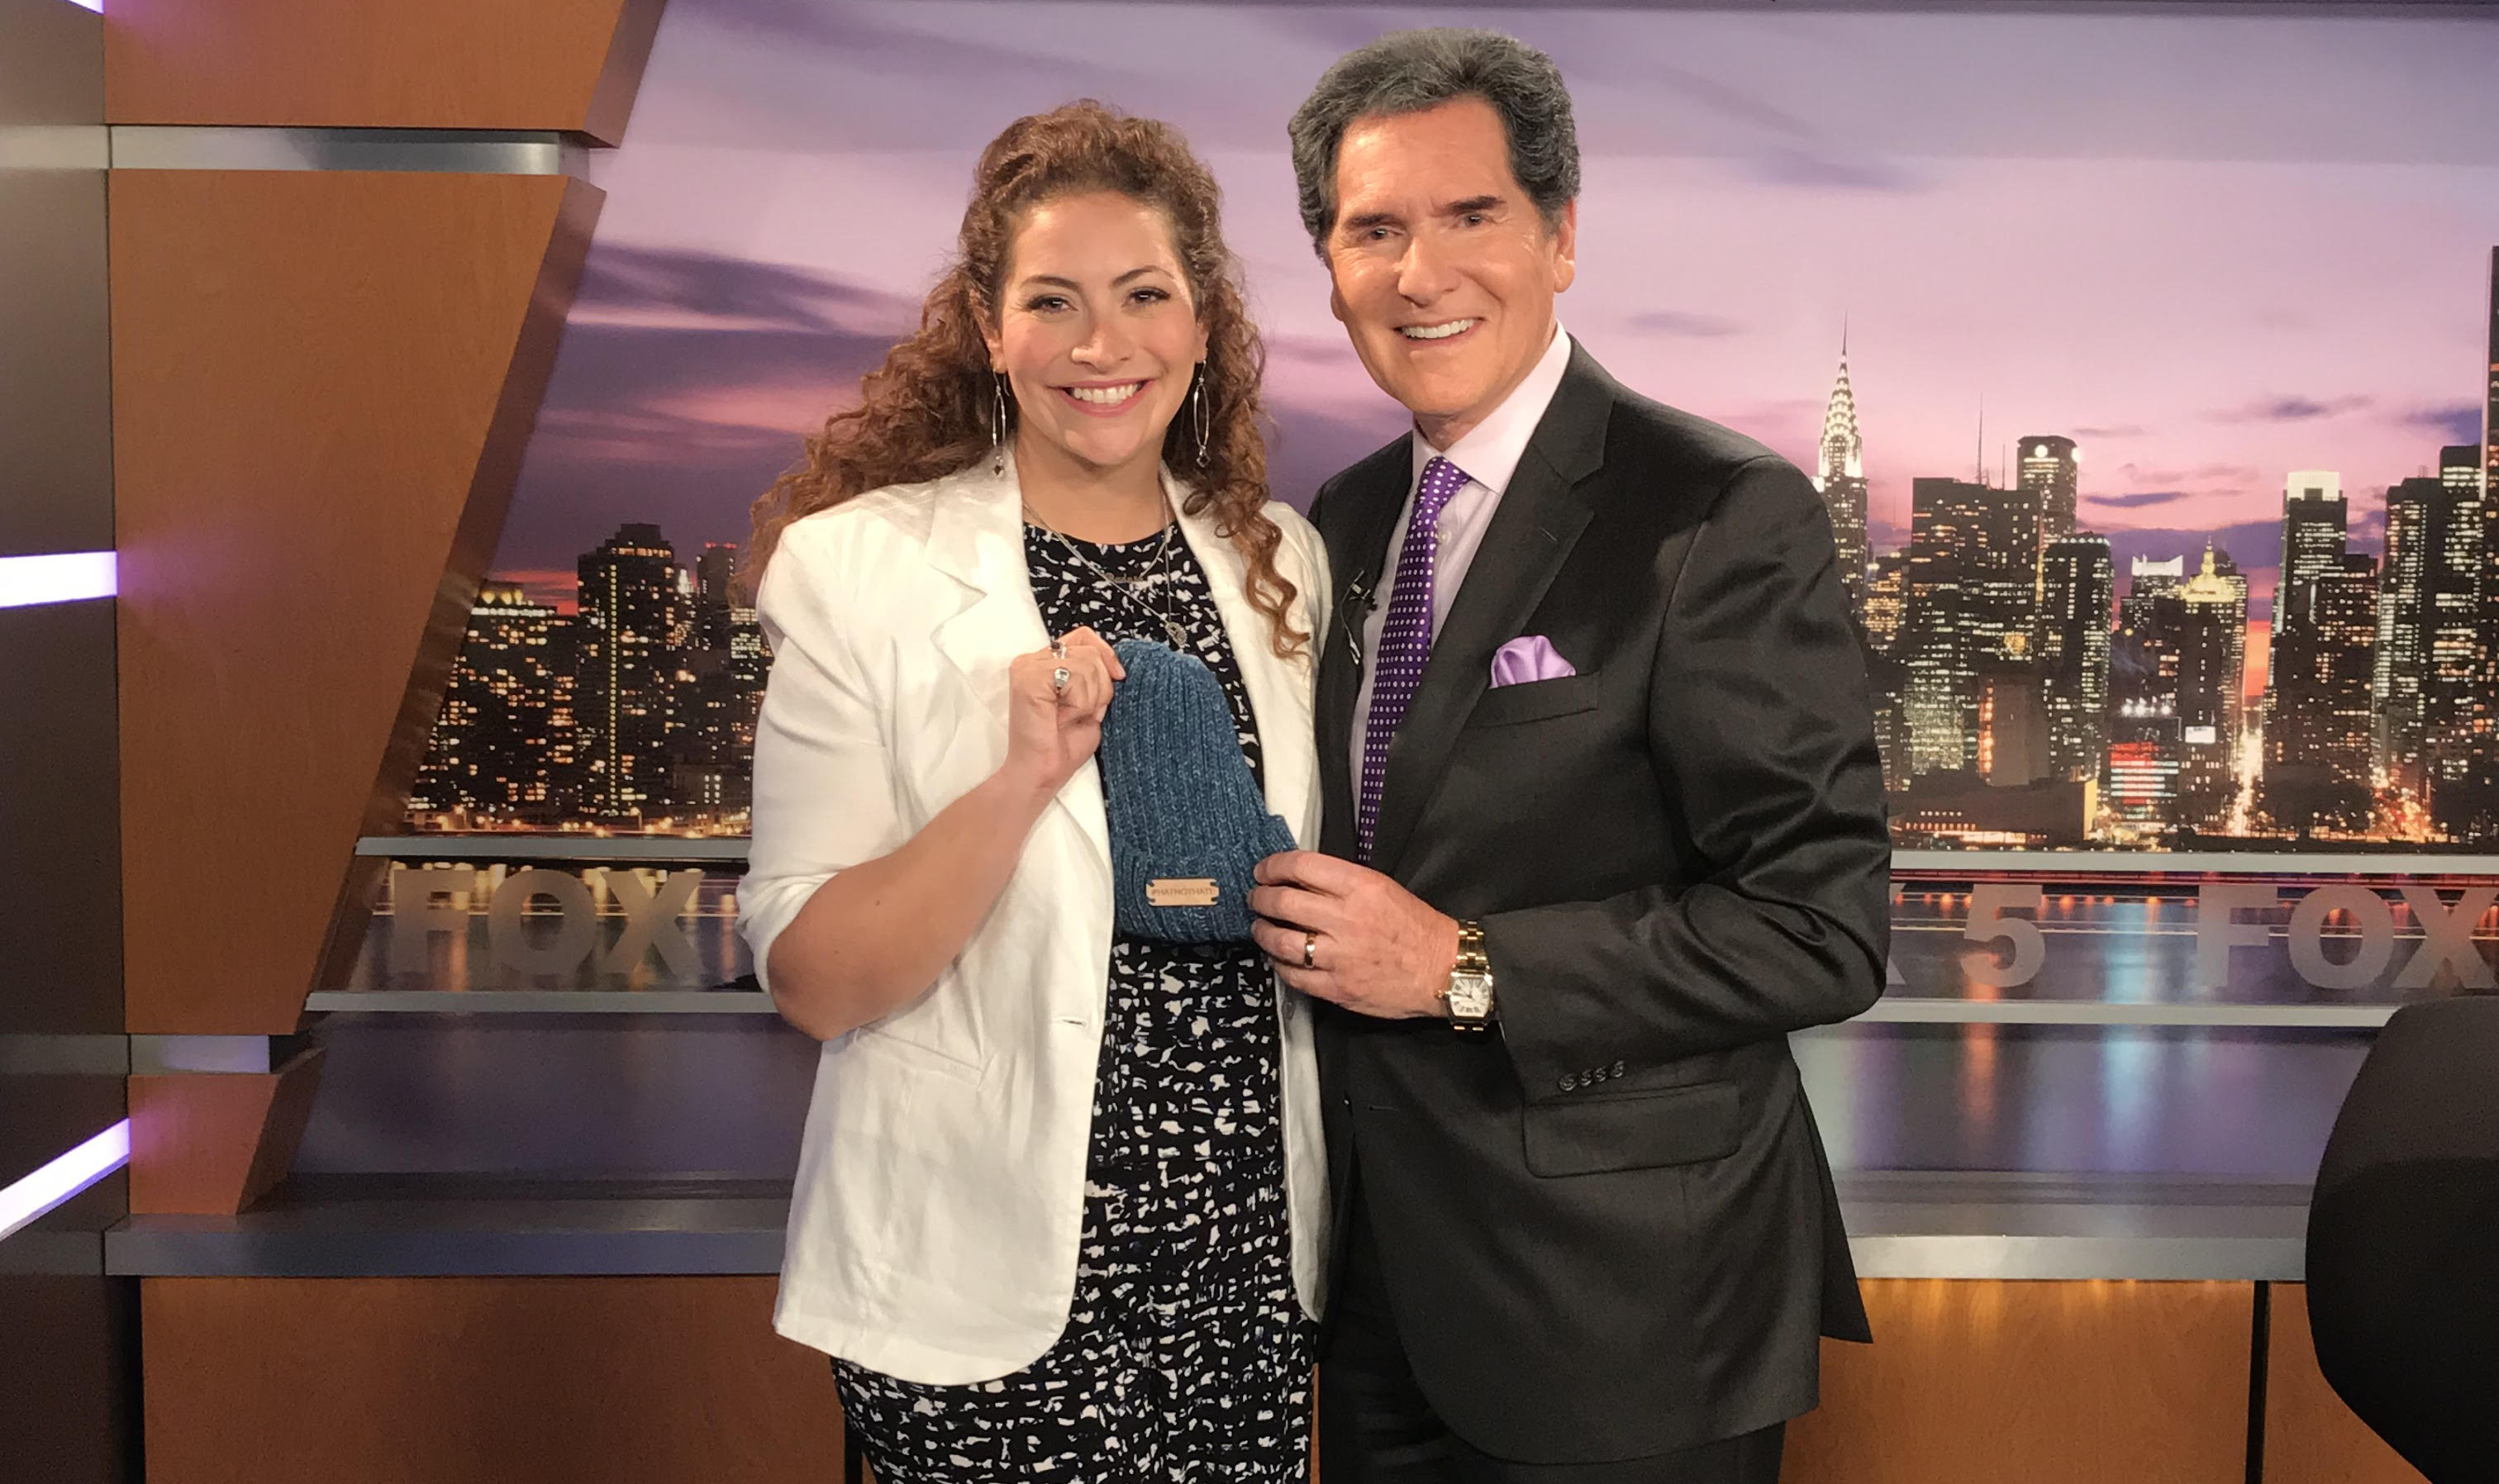 Shira posing with Fox5 news anchor in television studio